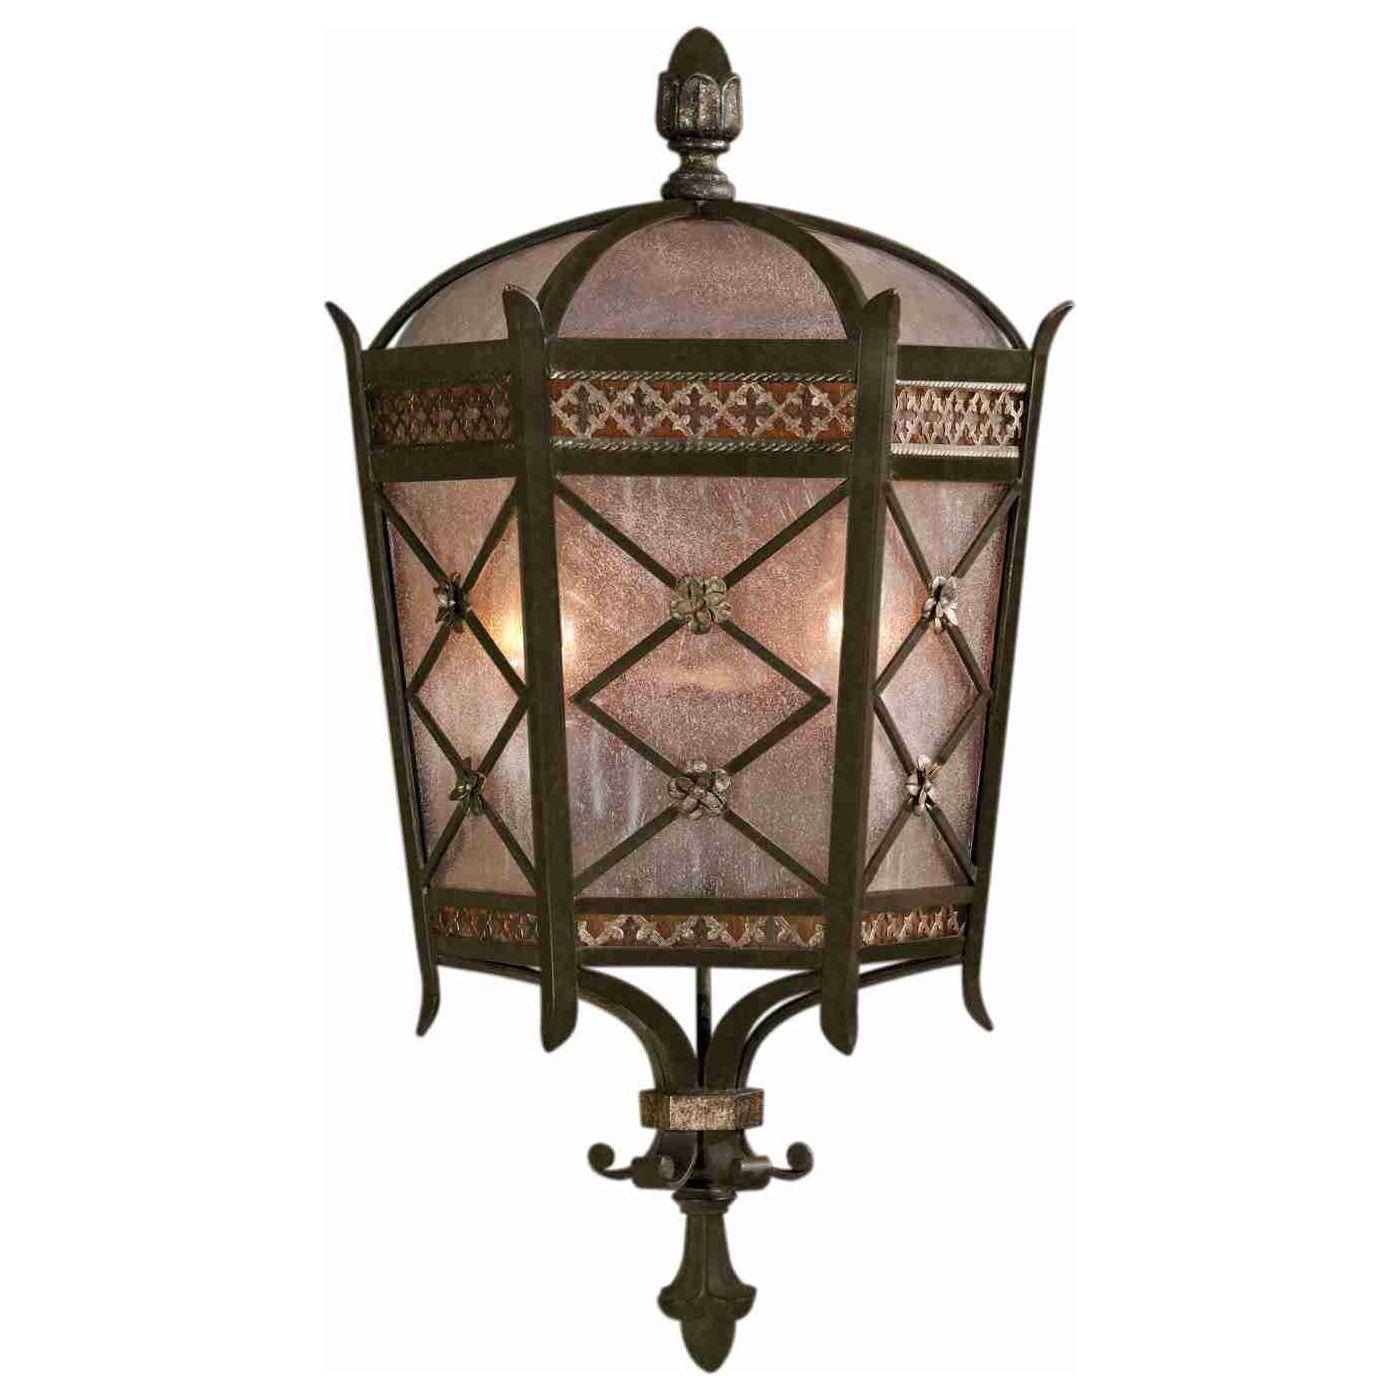 Fine Art Handcrafted Lighting - Chateau Outdoor Wall Light - Lights Canada